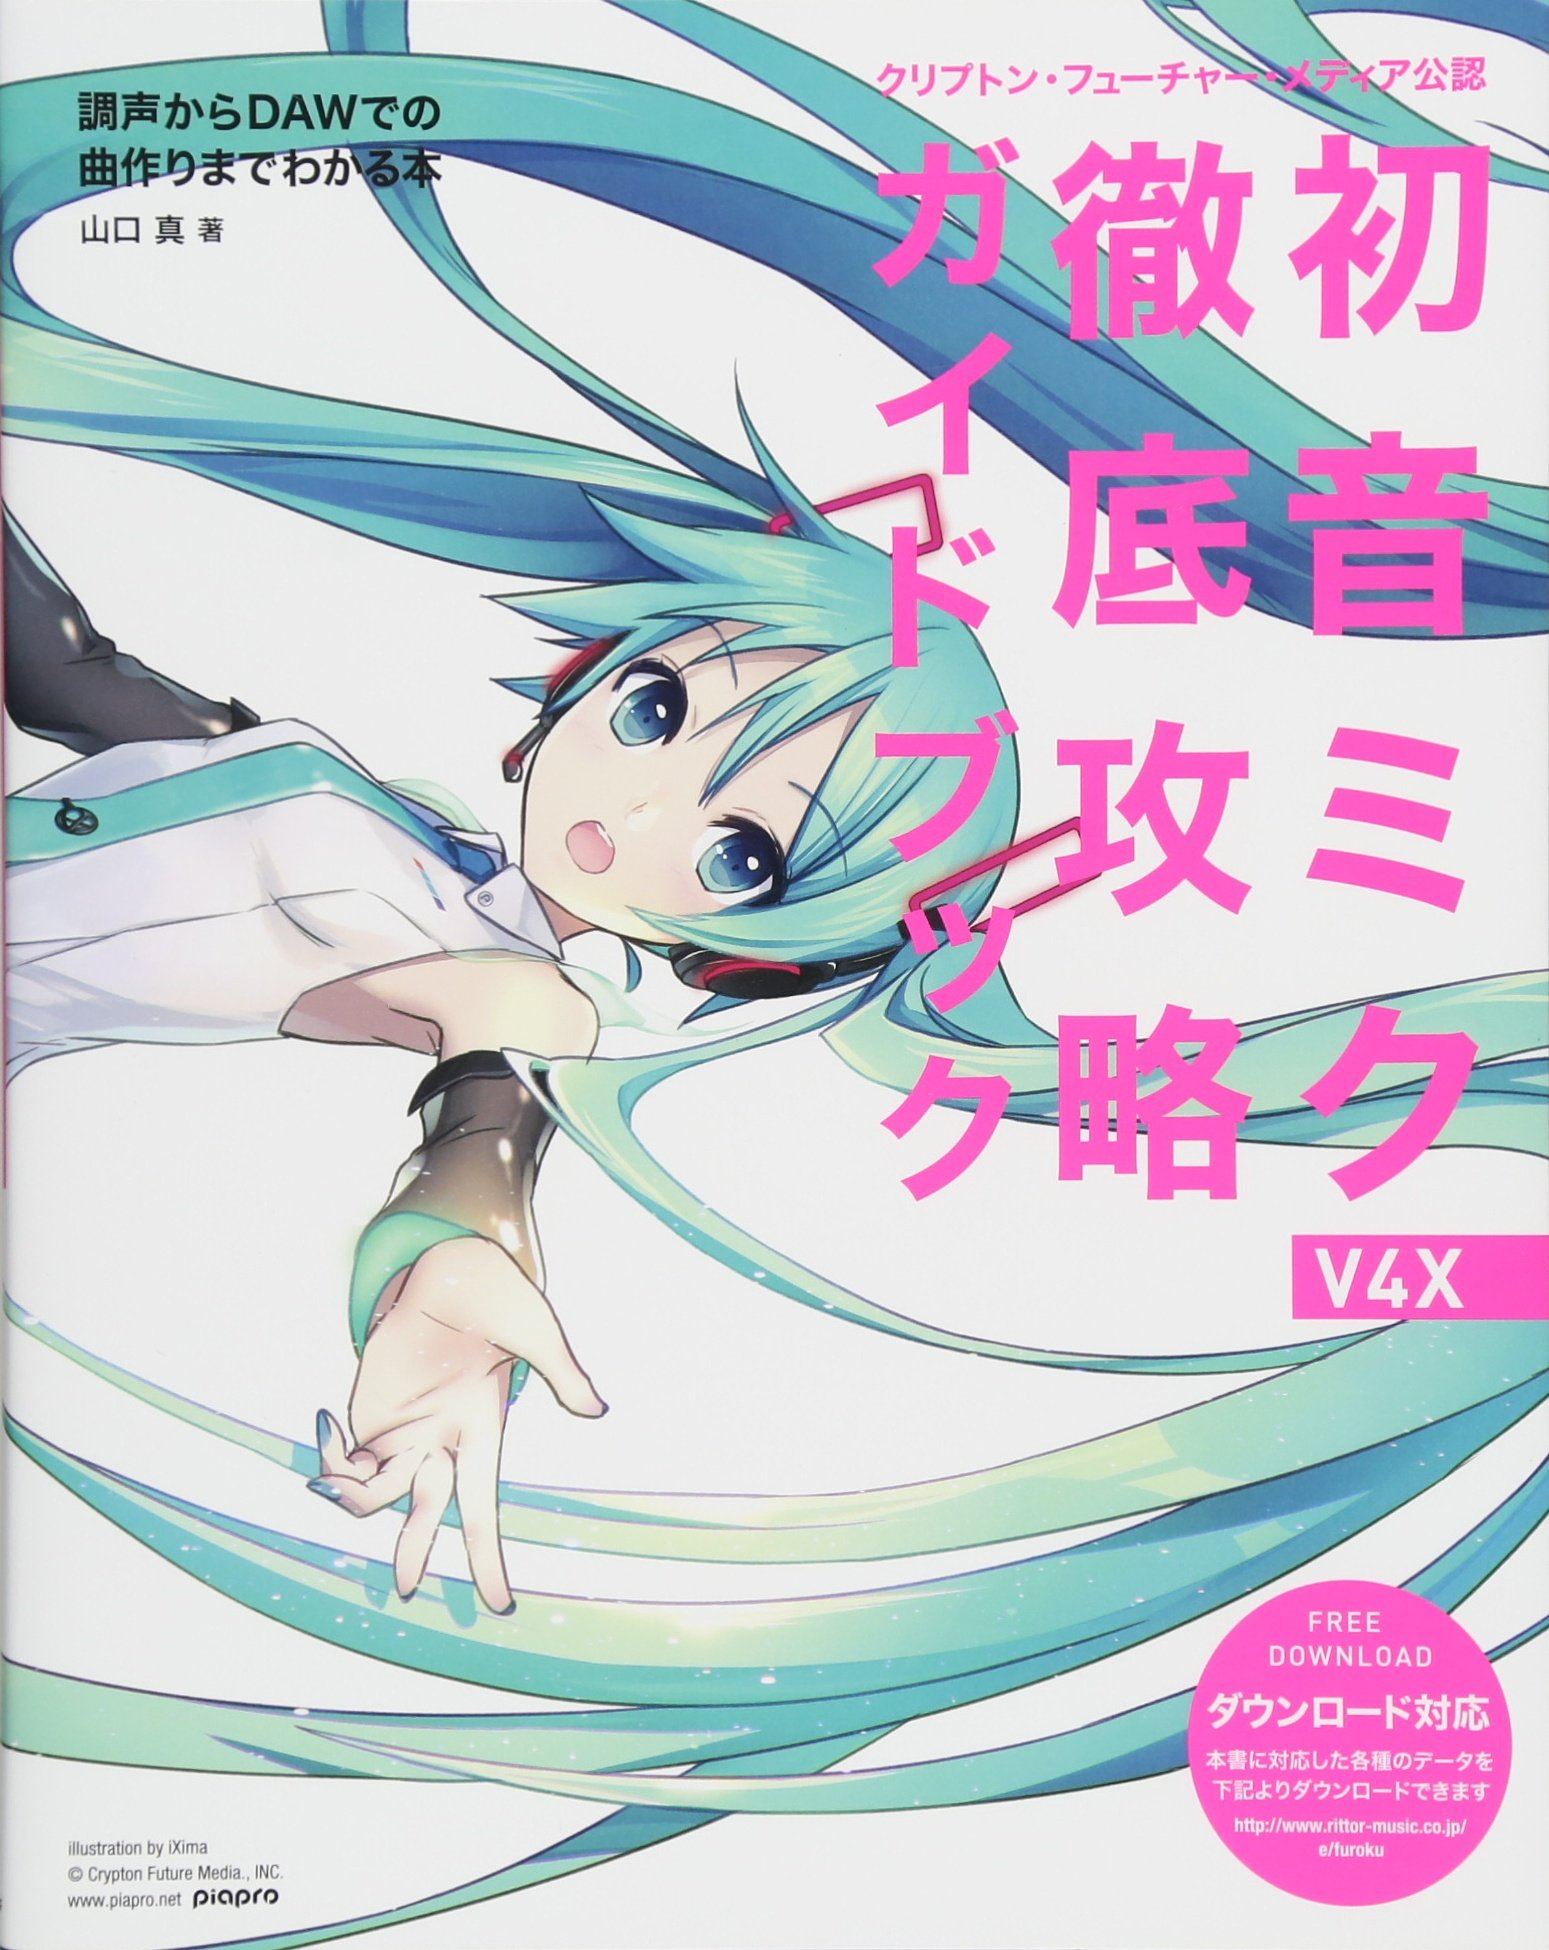 Hatsune Miku V4X Complete Guidebook How To create New Songs